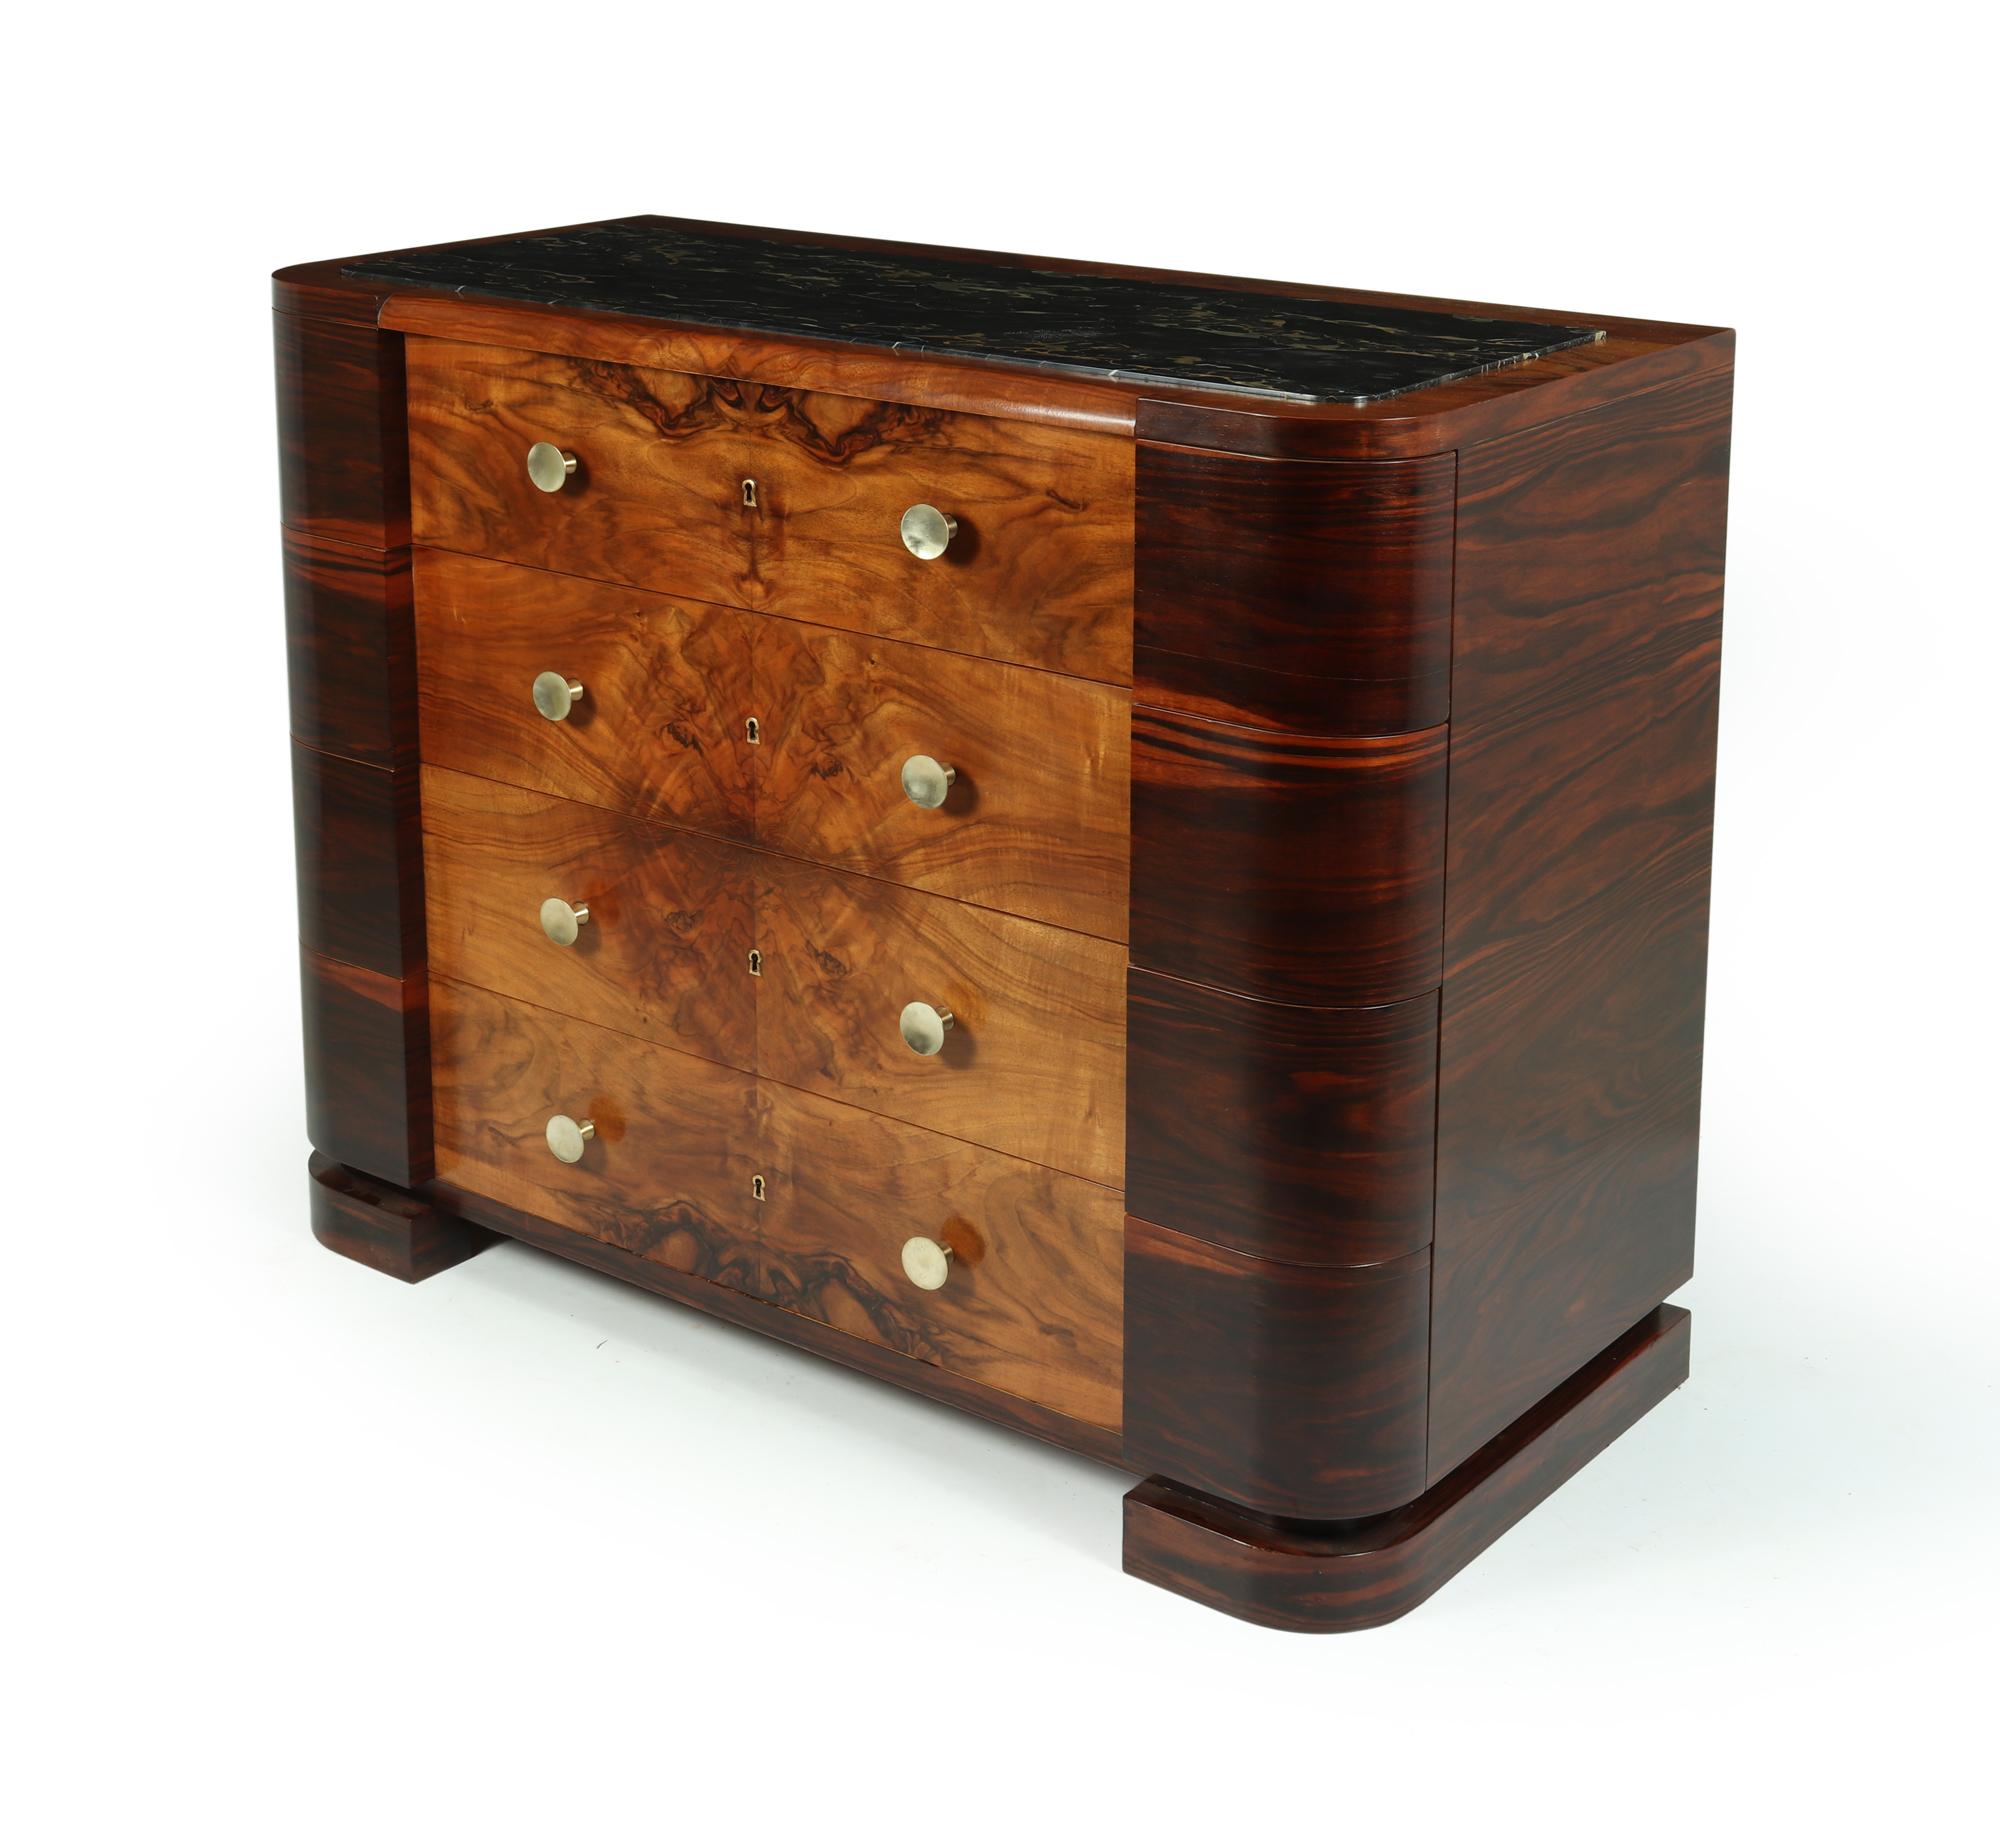 A large chest of drawers produced in Italy in the 1930’s , the chest of drawers is in figured walnut and Macassar ebony and has four long lockable drawers with one original key and inset Portoro marble top

The chest of drawers has been correctly